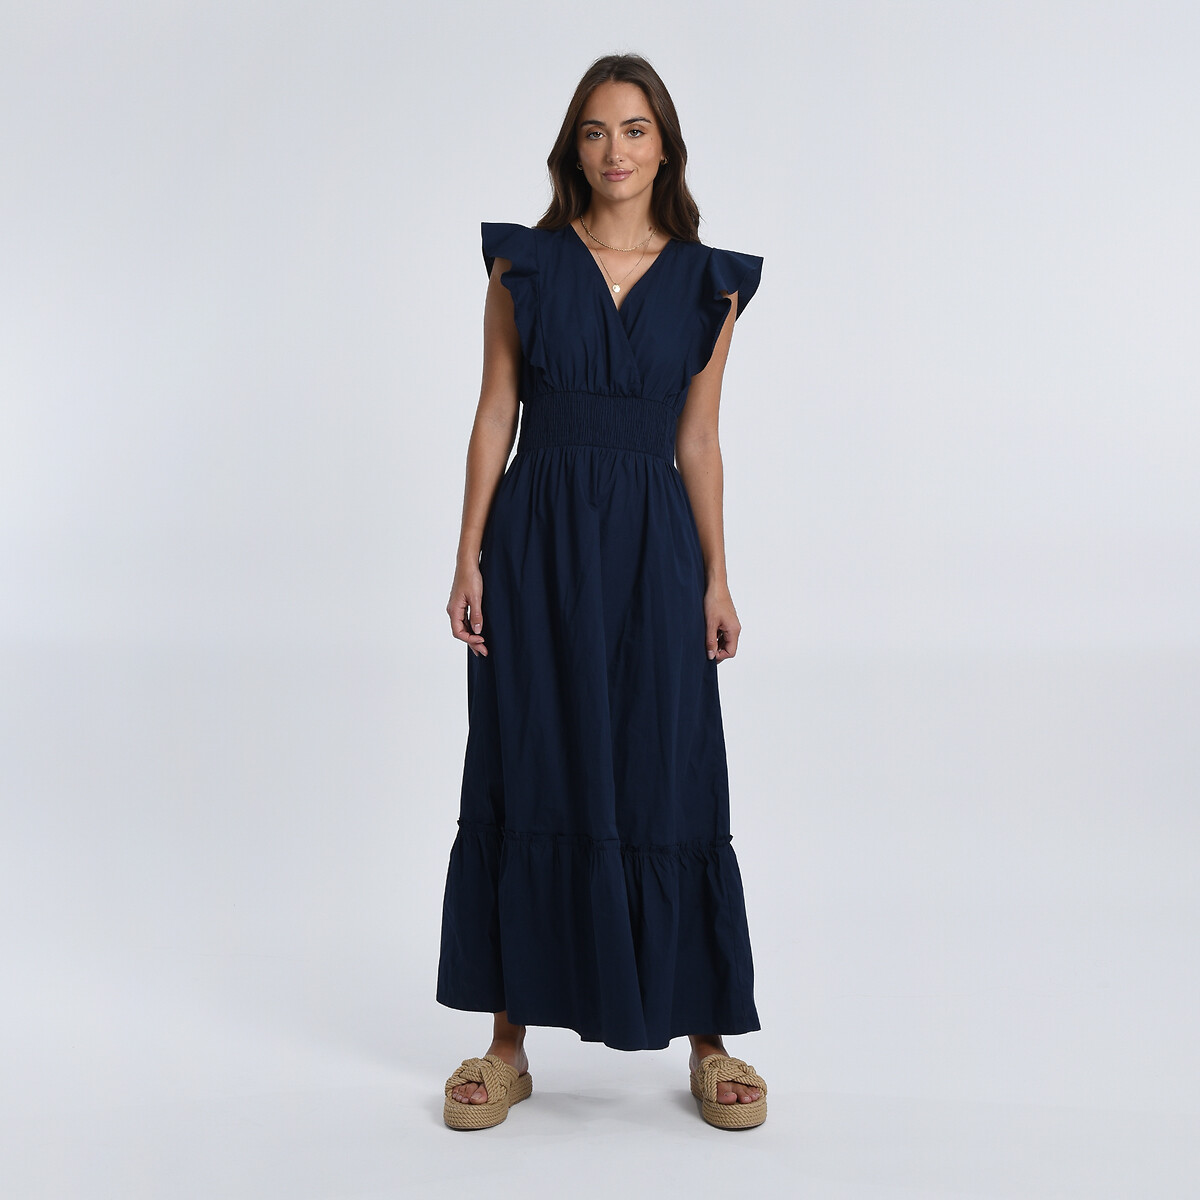 tiered cotton maxi dress with ruffles and short sleeves